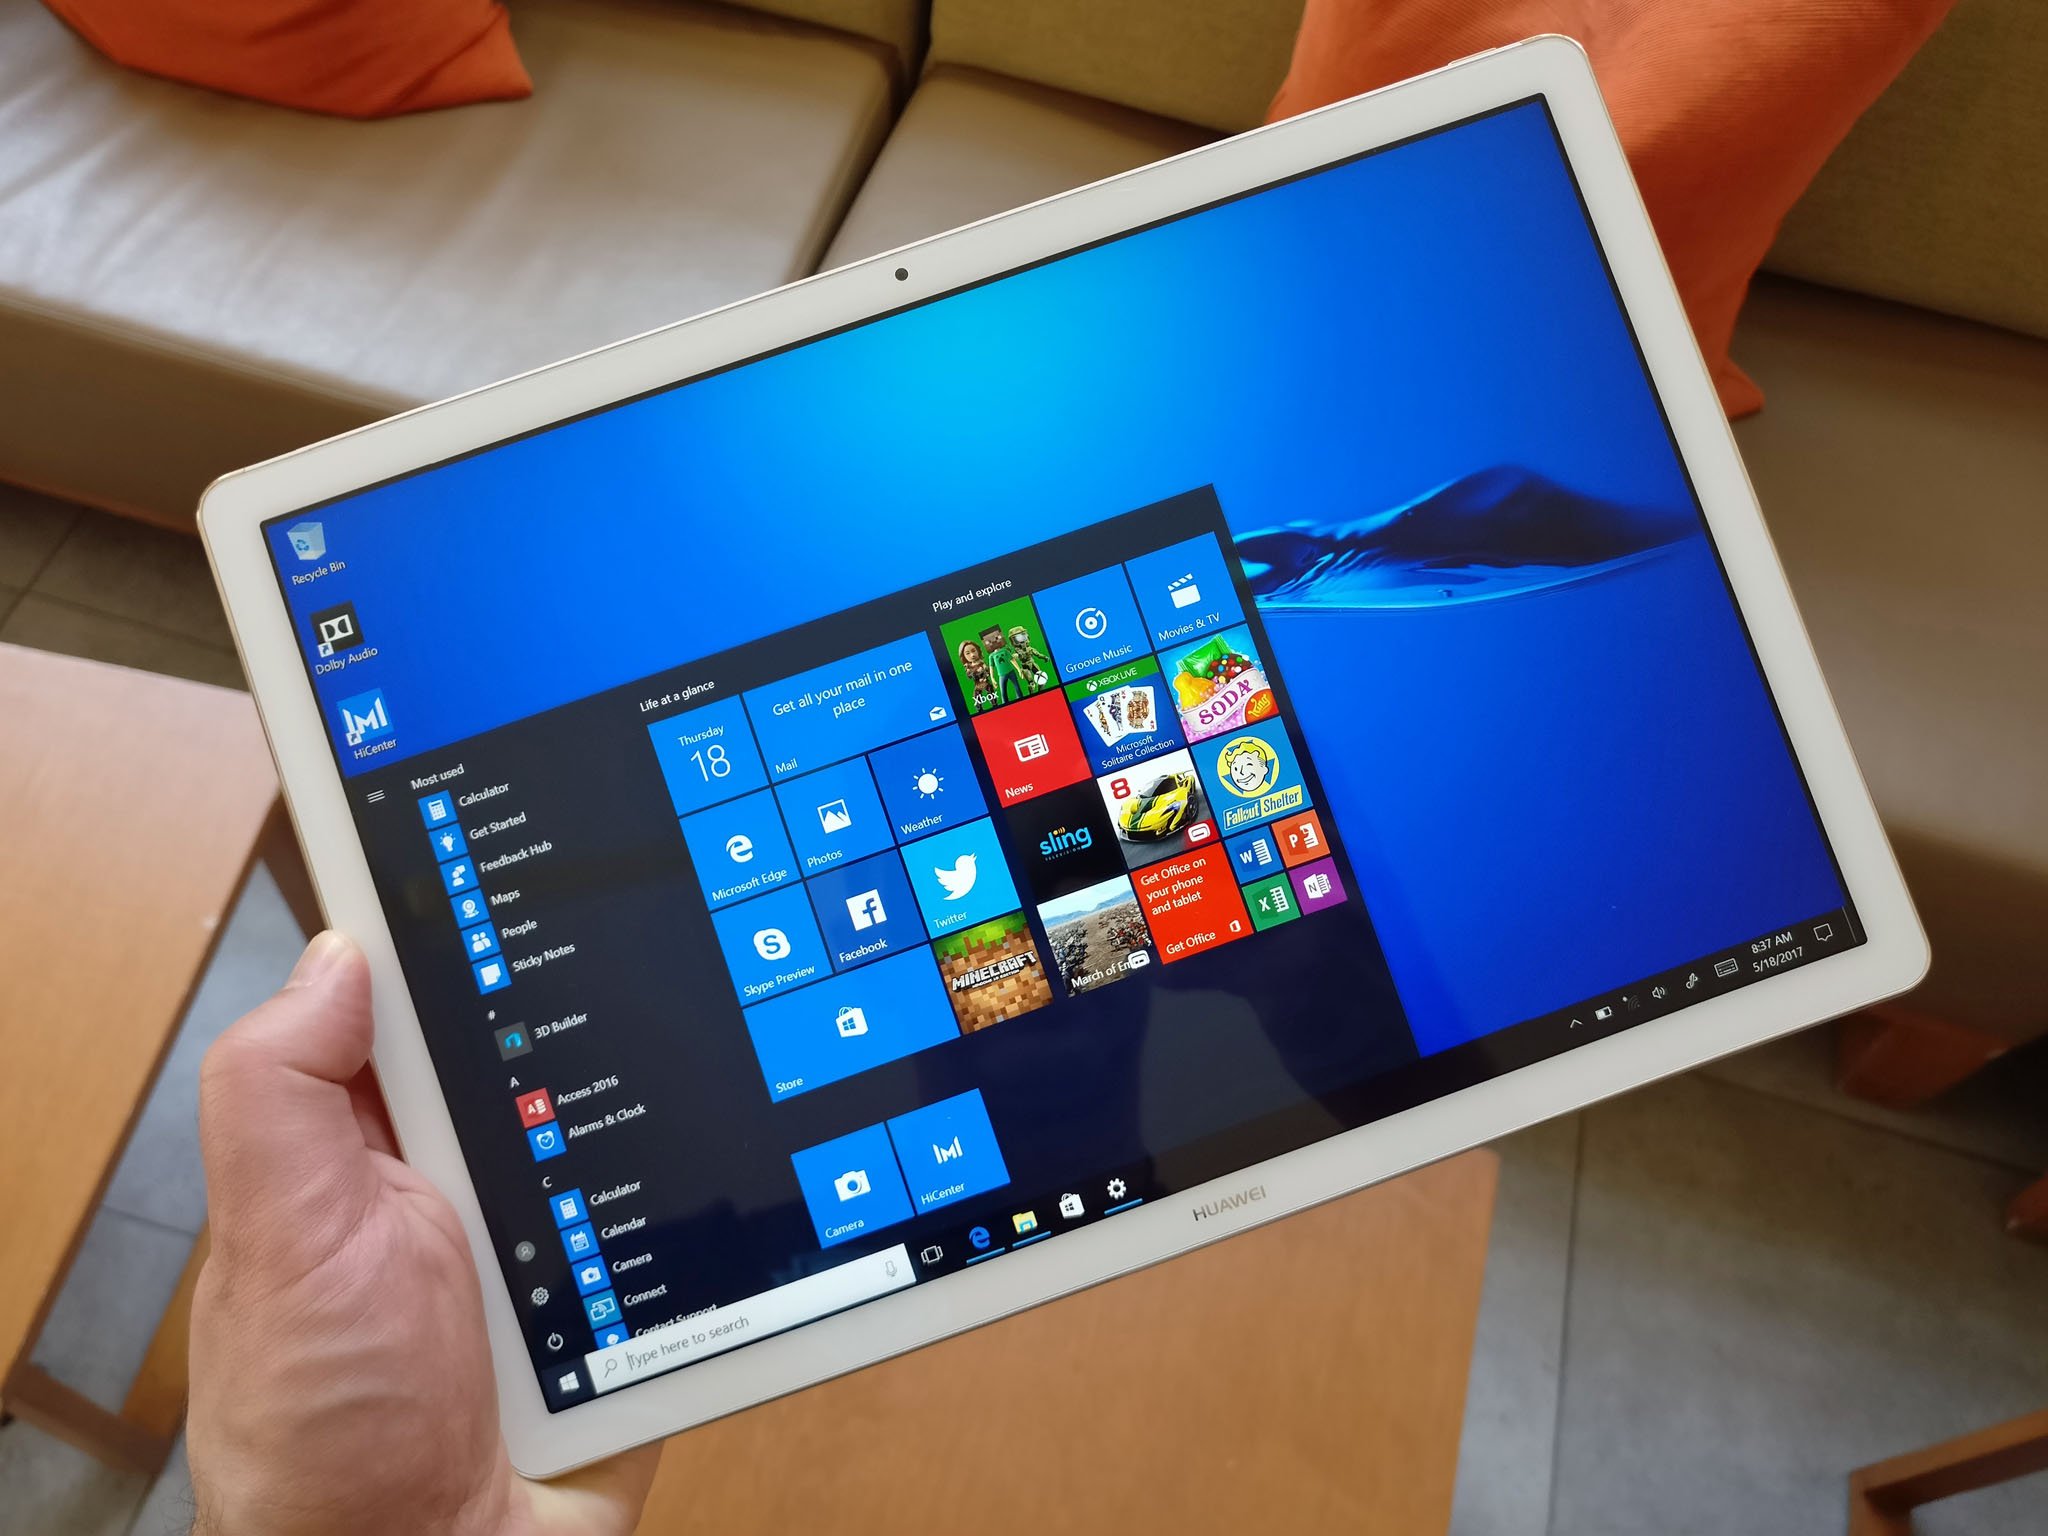 MateBook E is Huawei's refreshed 2-in-1 Windows 10 tablet ...